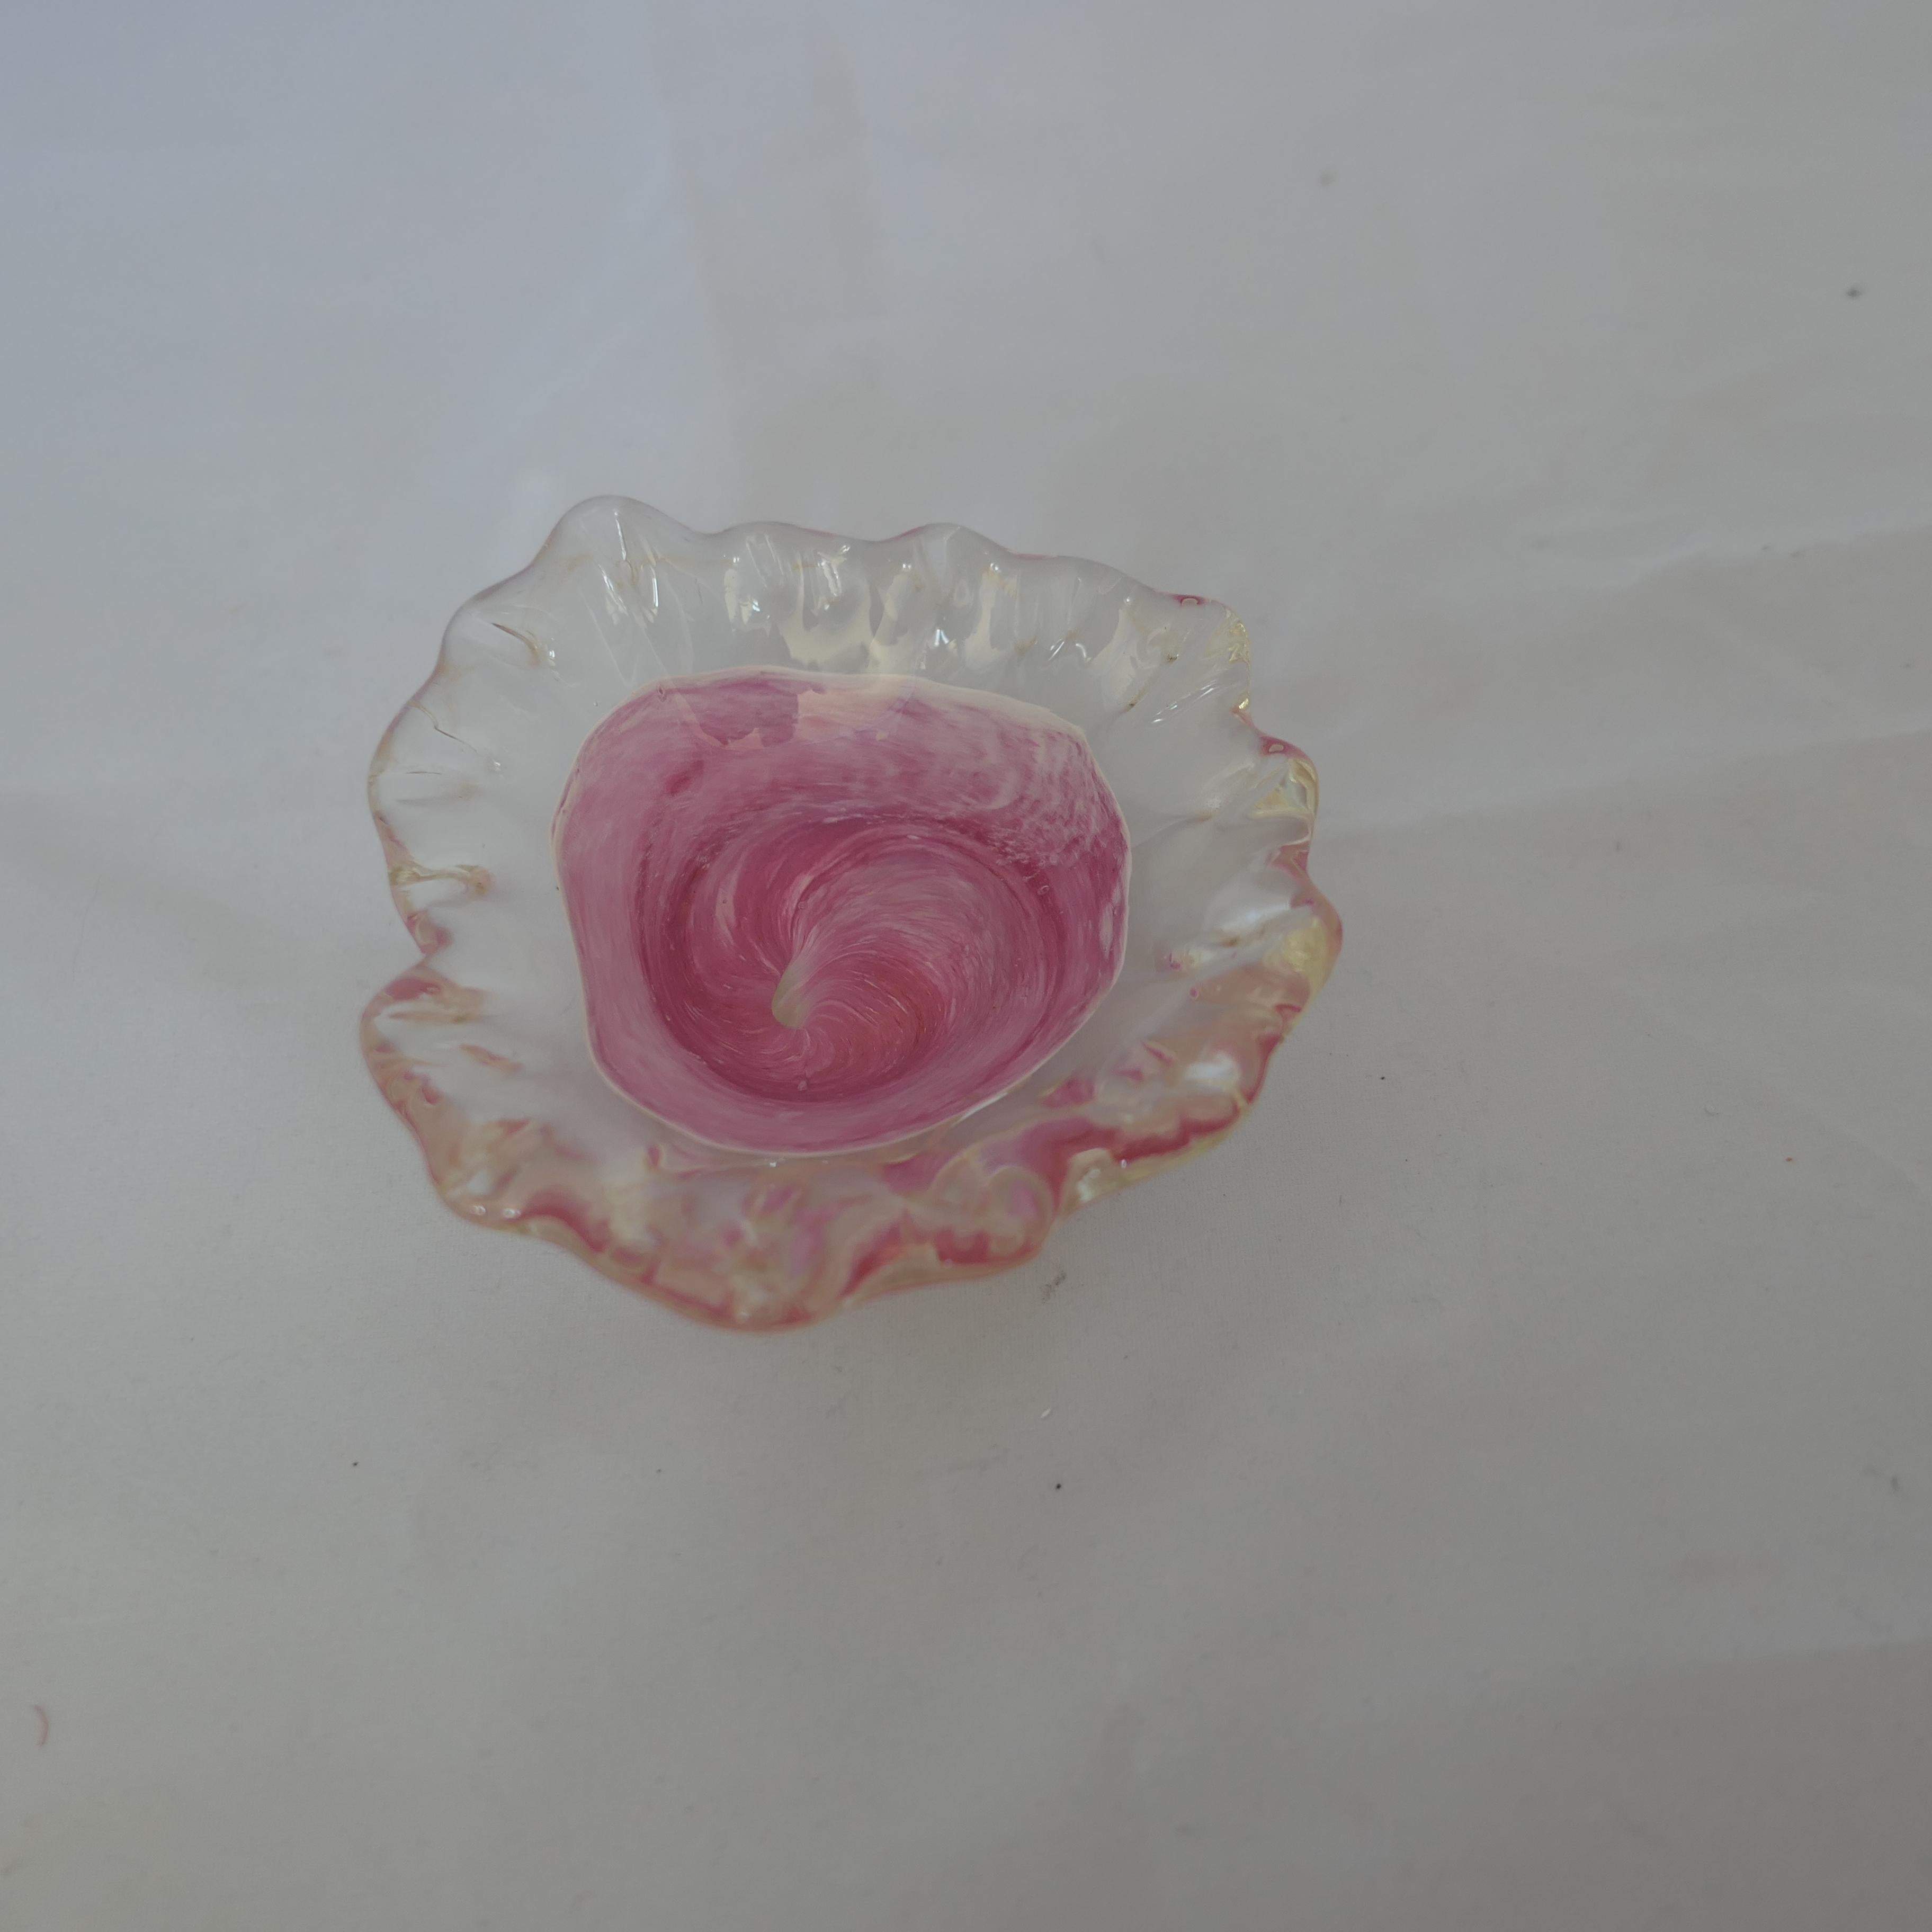 Isle of Wight Art Glass Cased Dish in Shades of Pink, with a Ruffled top    For Sale 1